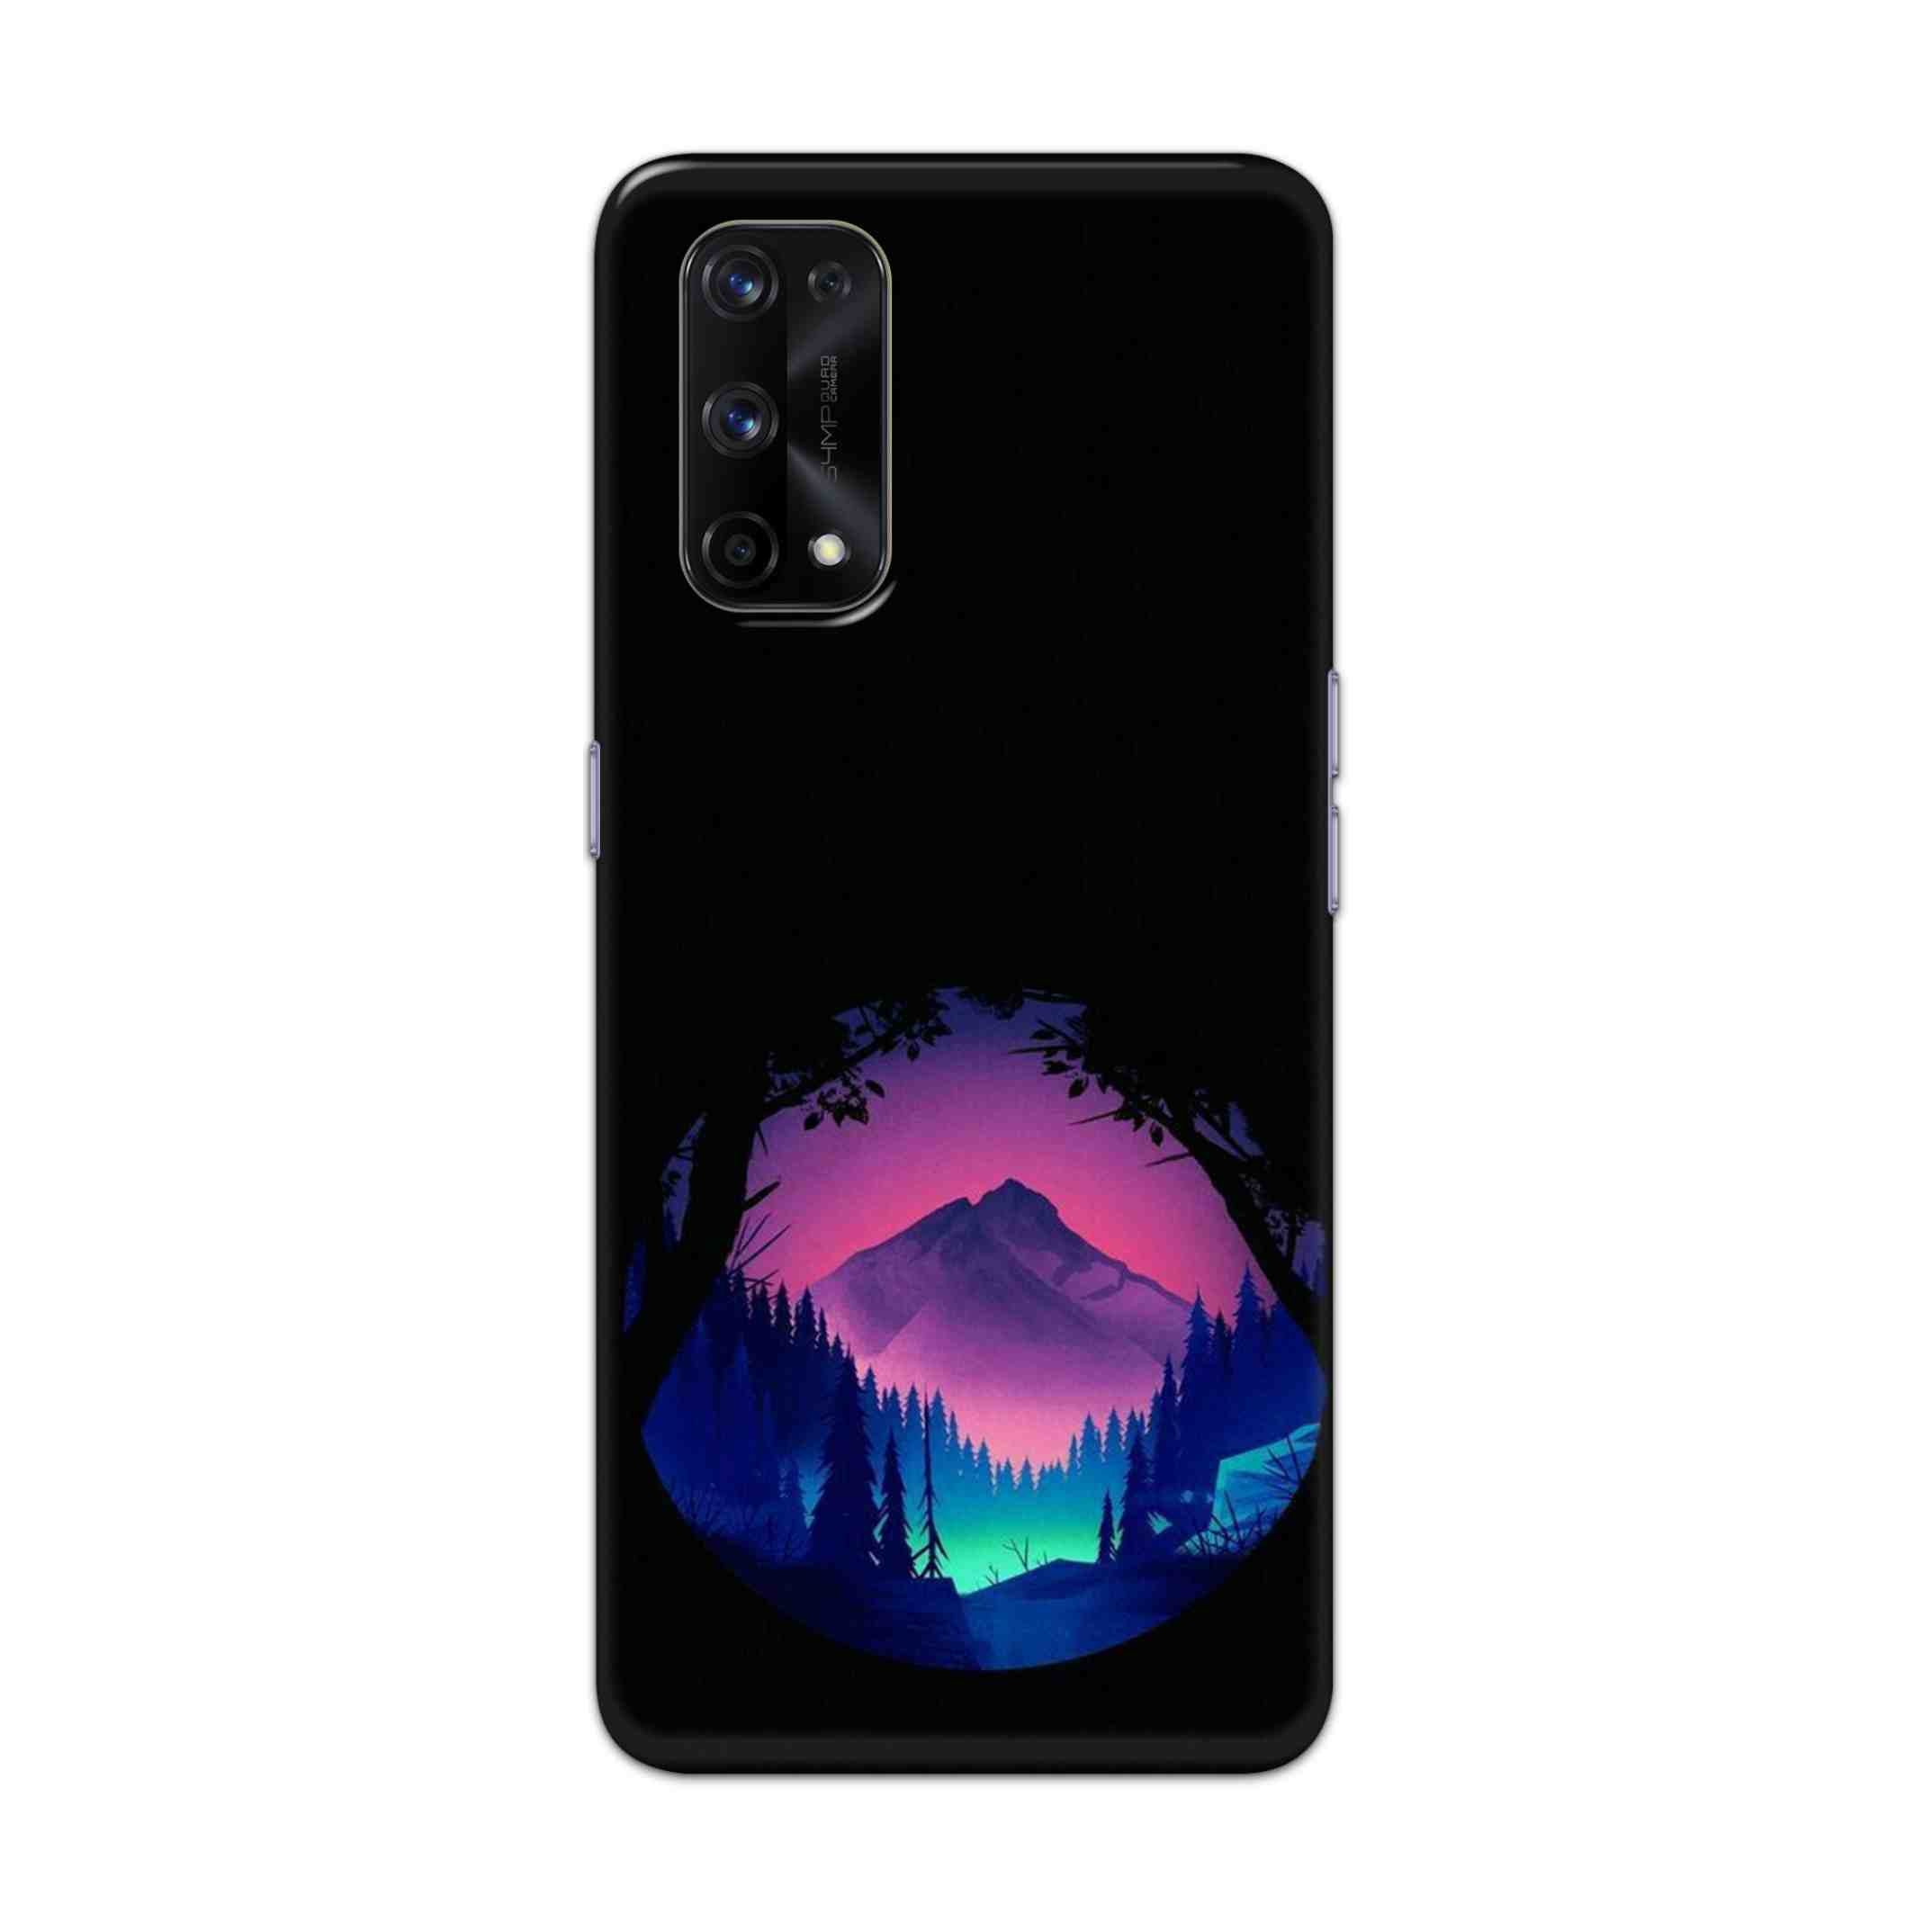 Buy Neon Tables Hard Back Mobile Phone Case Cover For Realme X7 Pro Online